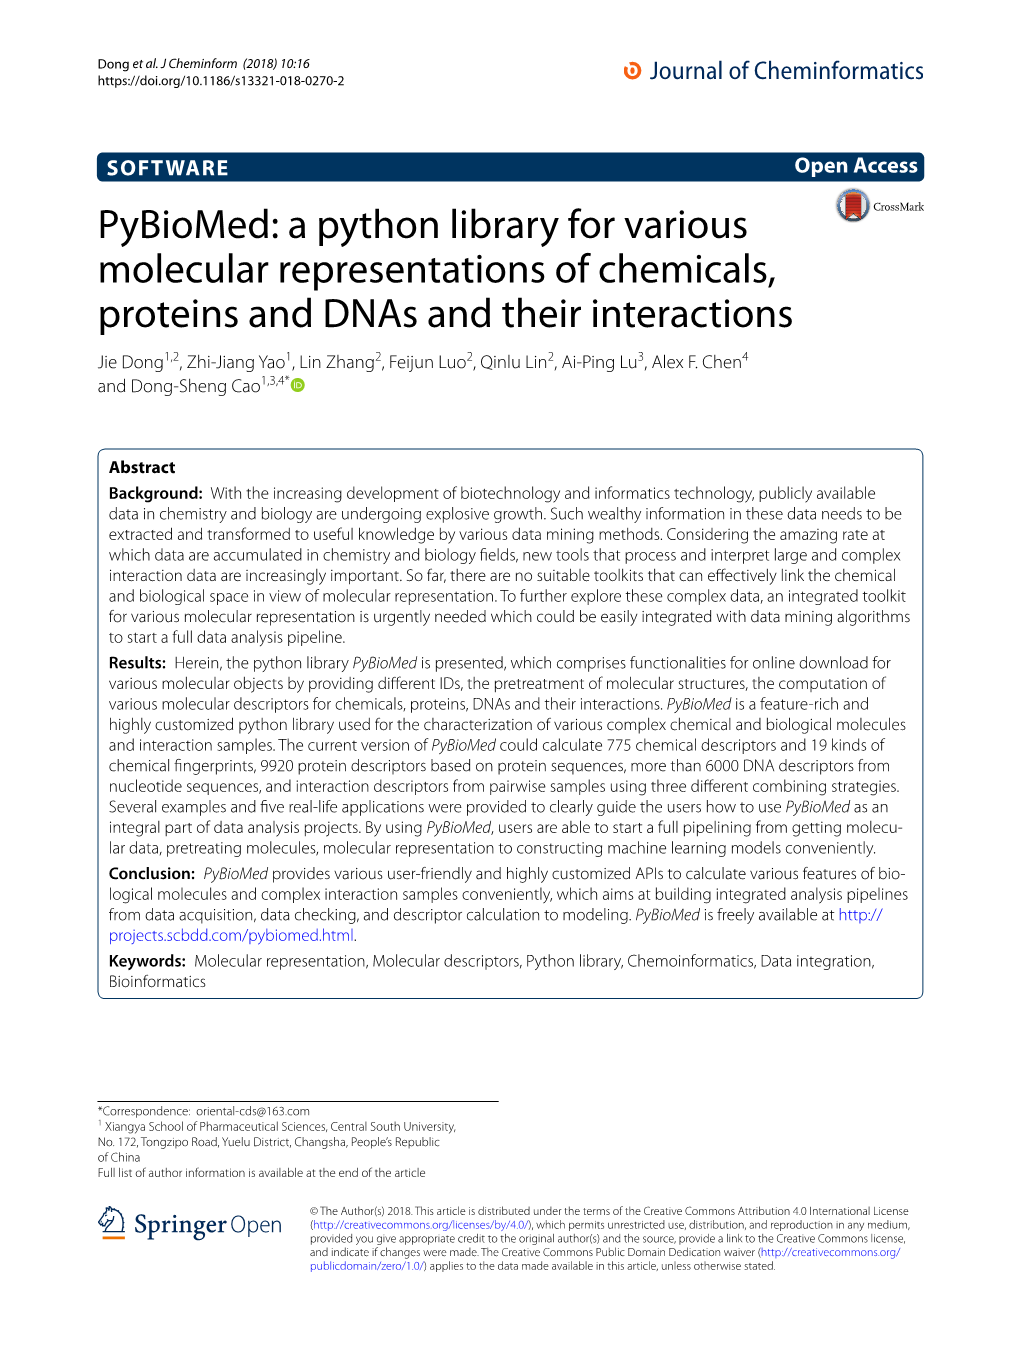 Pybiomed: a Python Library for Various Molecular Representations Of